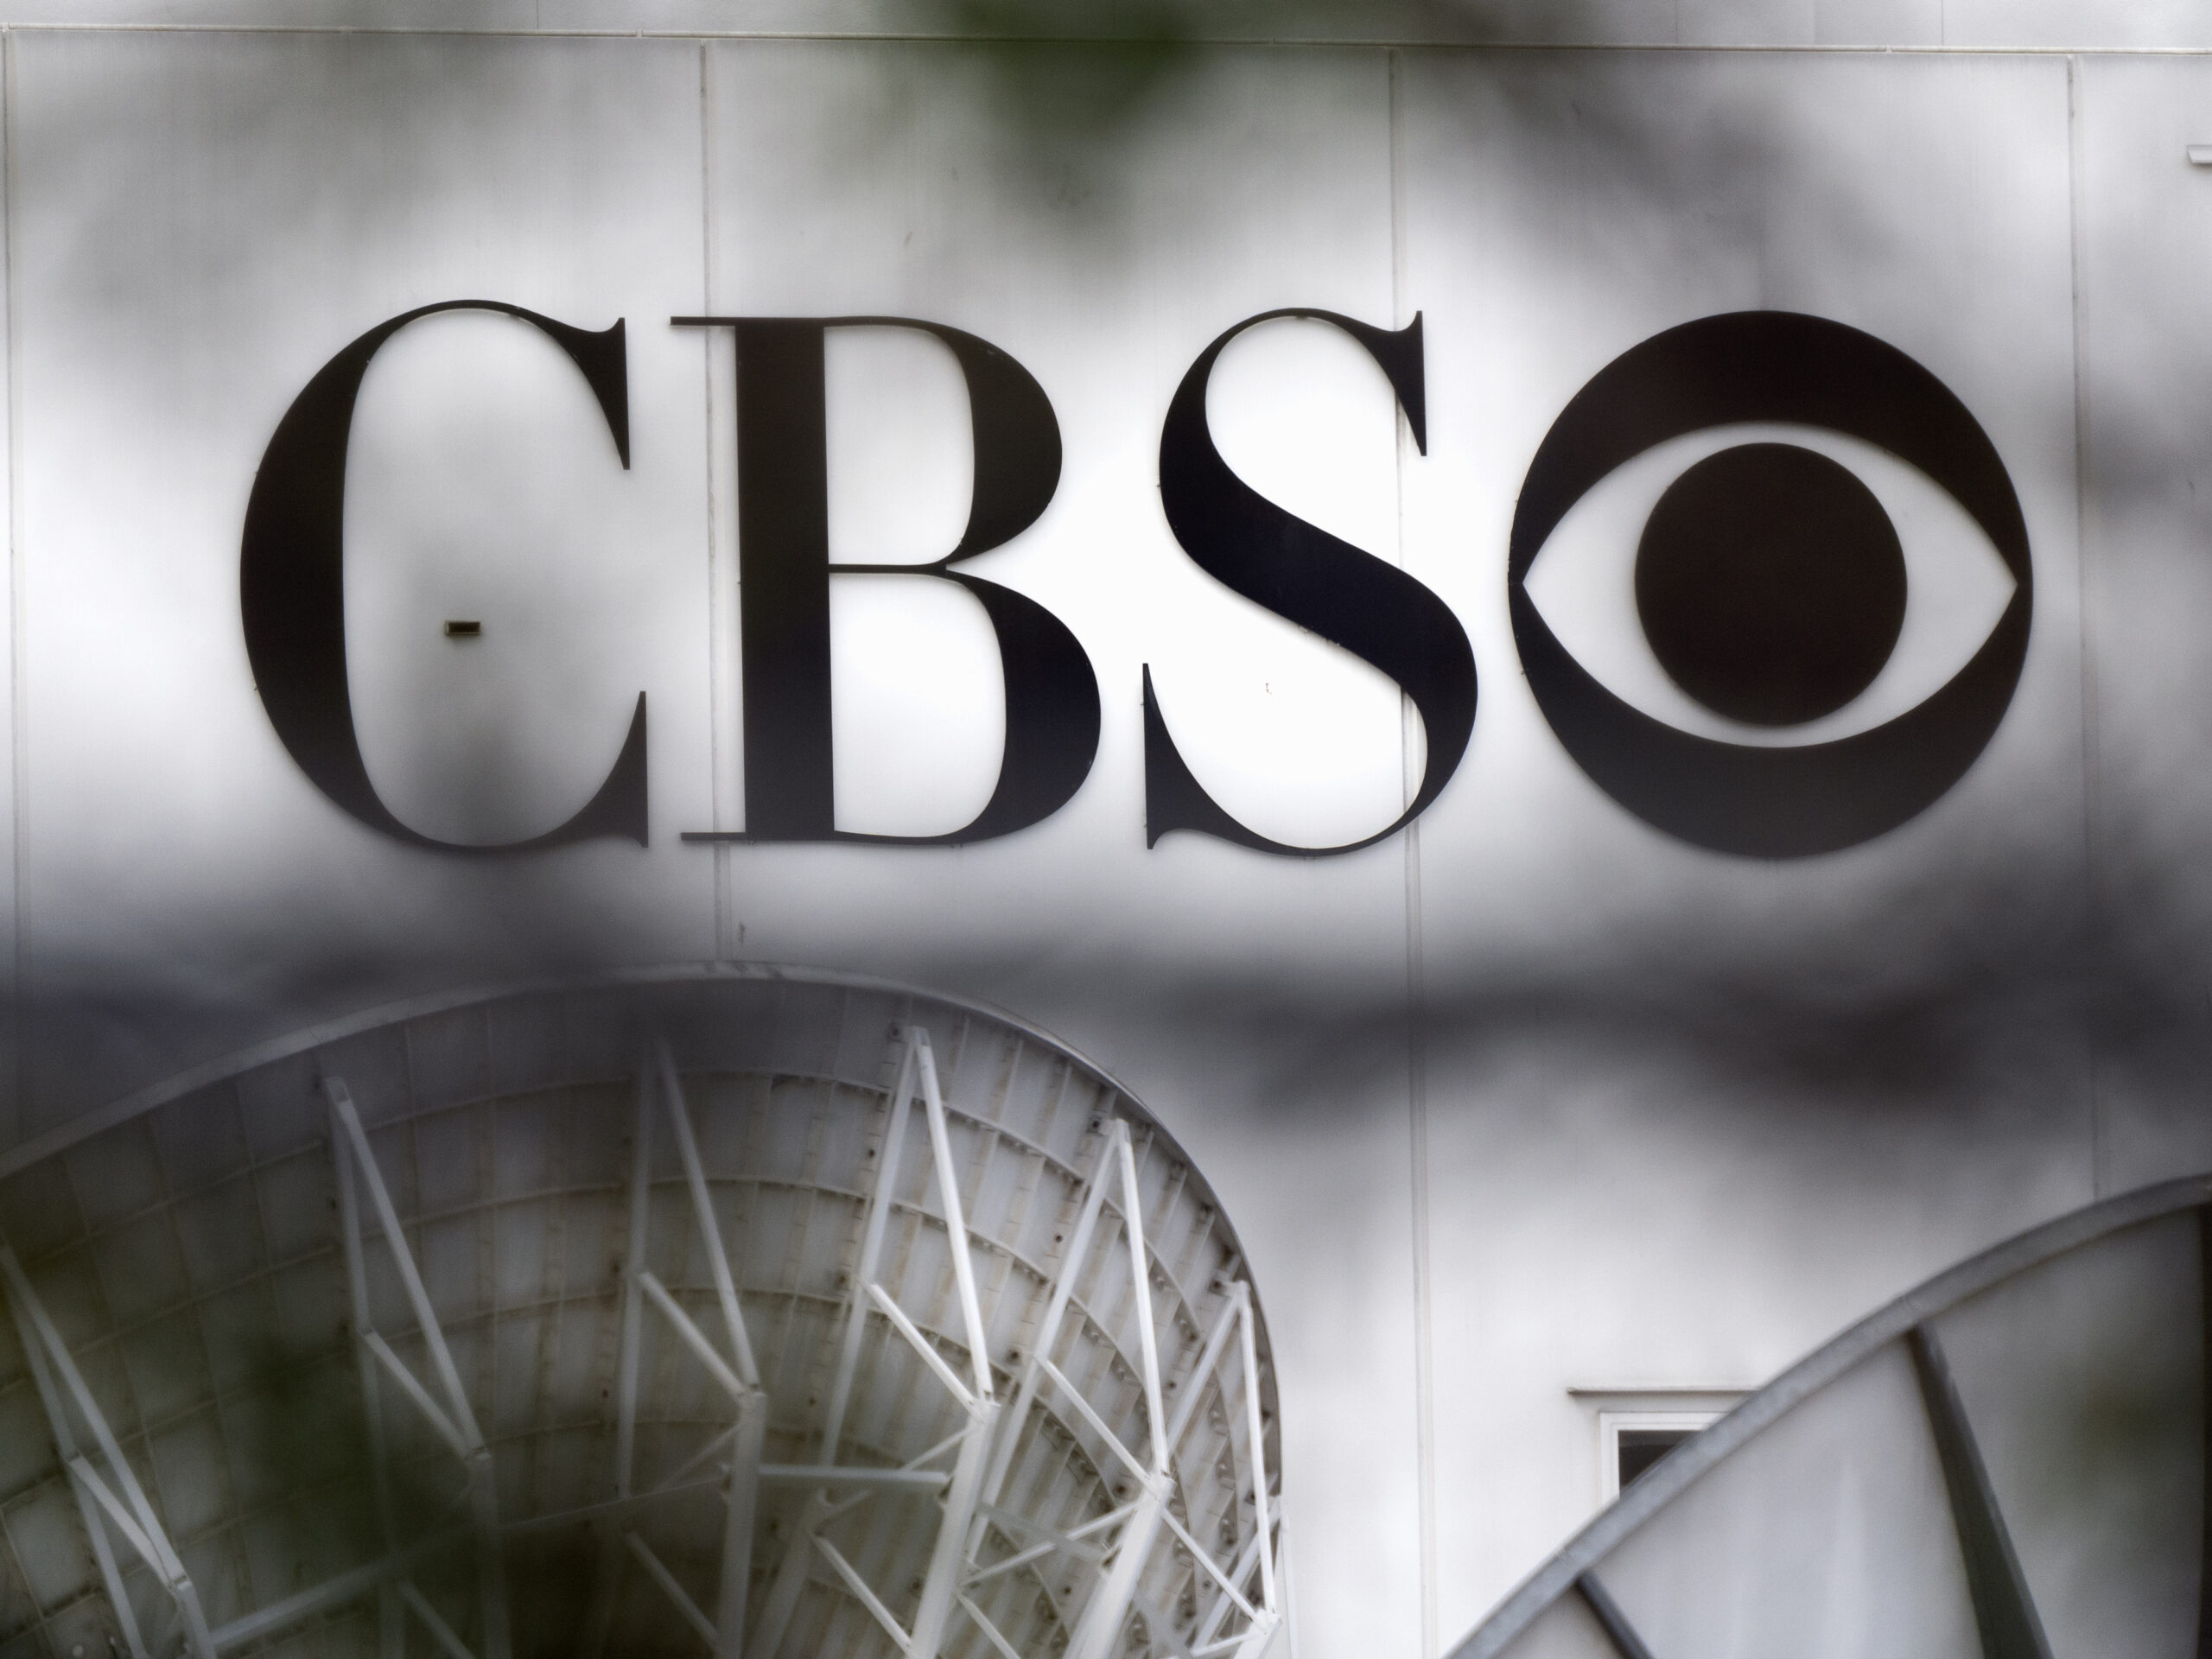 CBS is developing its first Black daytime soap opera in 35 years